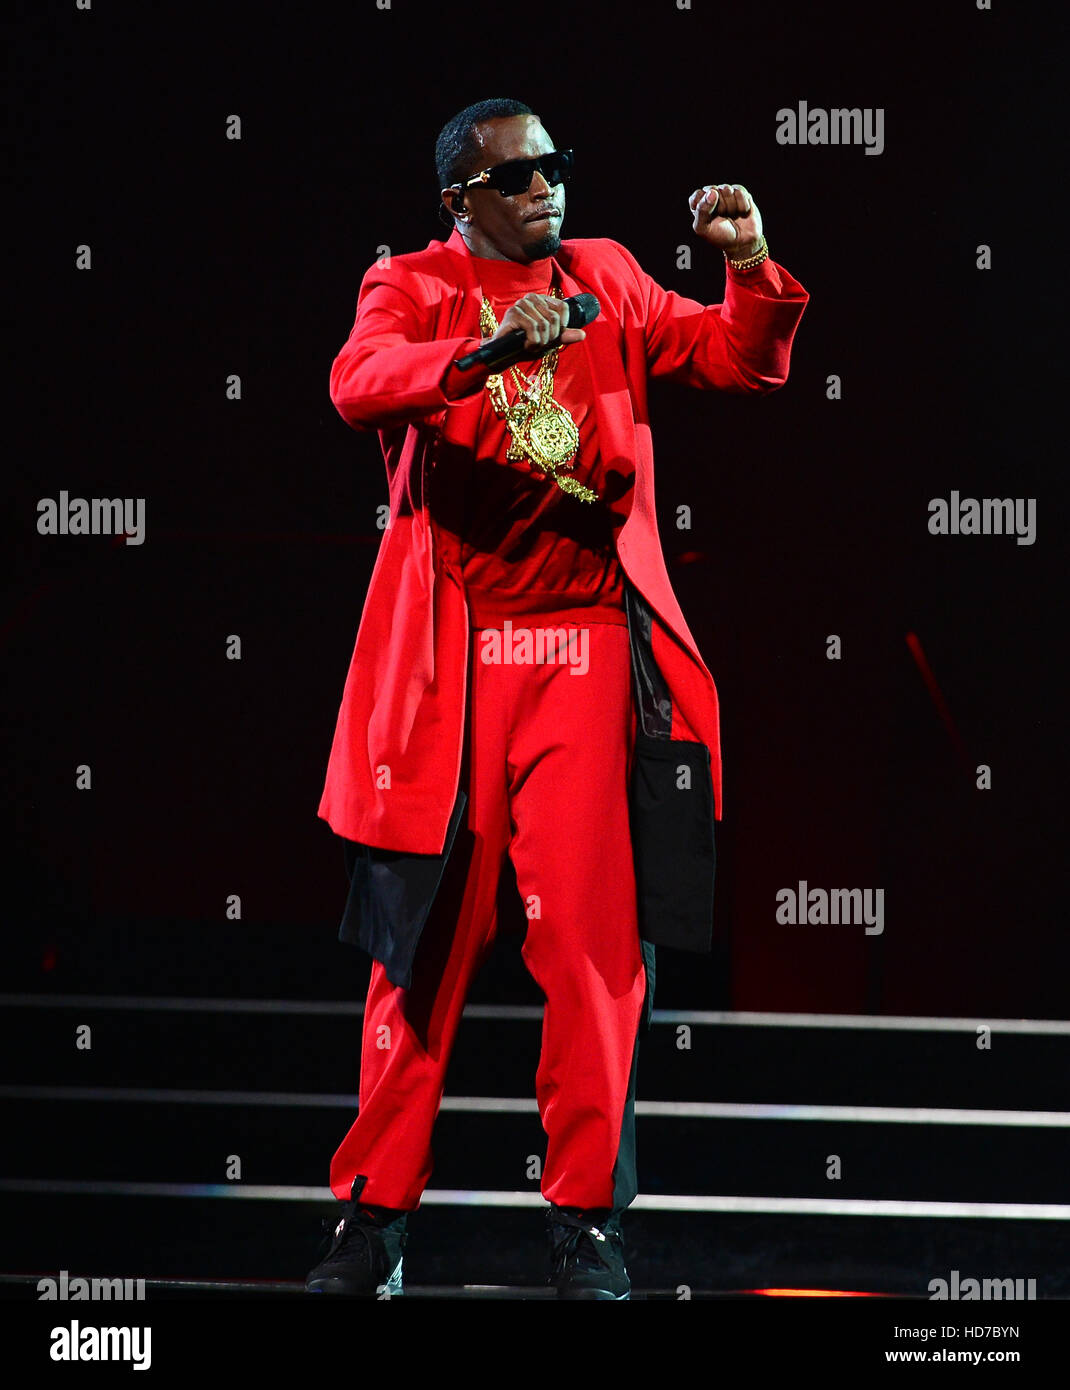 Sean Combs performs onstage during the Bad Boy Reunion Tour at the American Airlines Arena in Miami, Florida.  Featuring: Sean Combs, Puff Daddy Where: Miami, Florida, United States When: 10 Sep 2016 Stock Photo